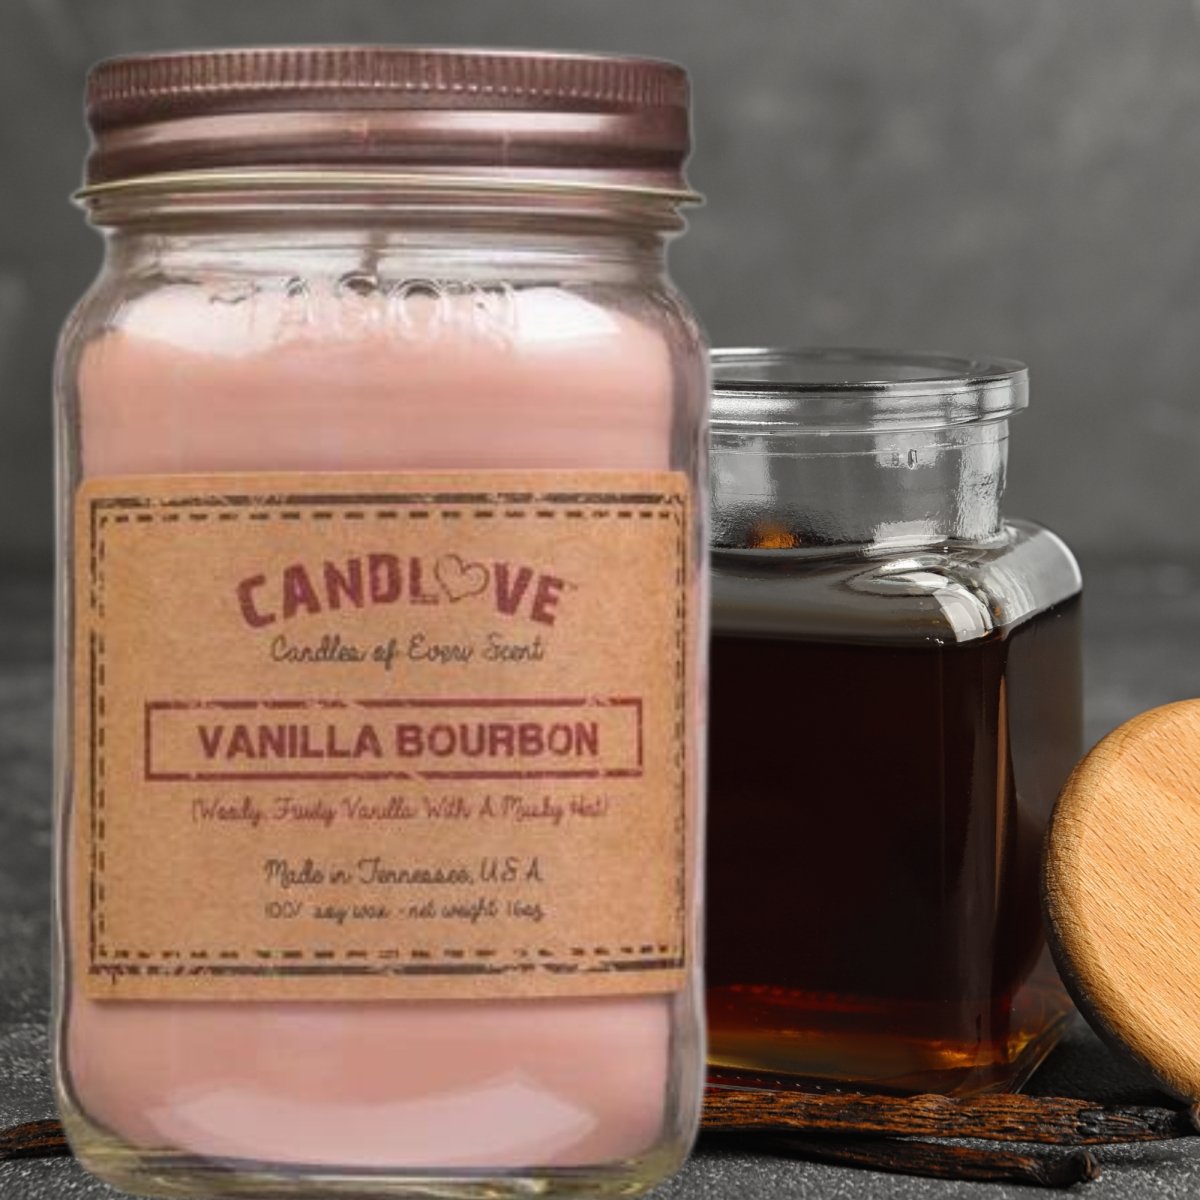 Picture of PPI SUPPLIES Vanilla-C Candlove Vanilla Bourbon Scented Candle - Non-Toxic 100% Soy Candle - Handmade & Hand Poured Long Burning Candle - Highly Scented All Natural Clean Burning Candle (16 OZ Mason Jar) Made in The USA